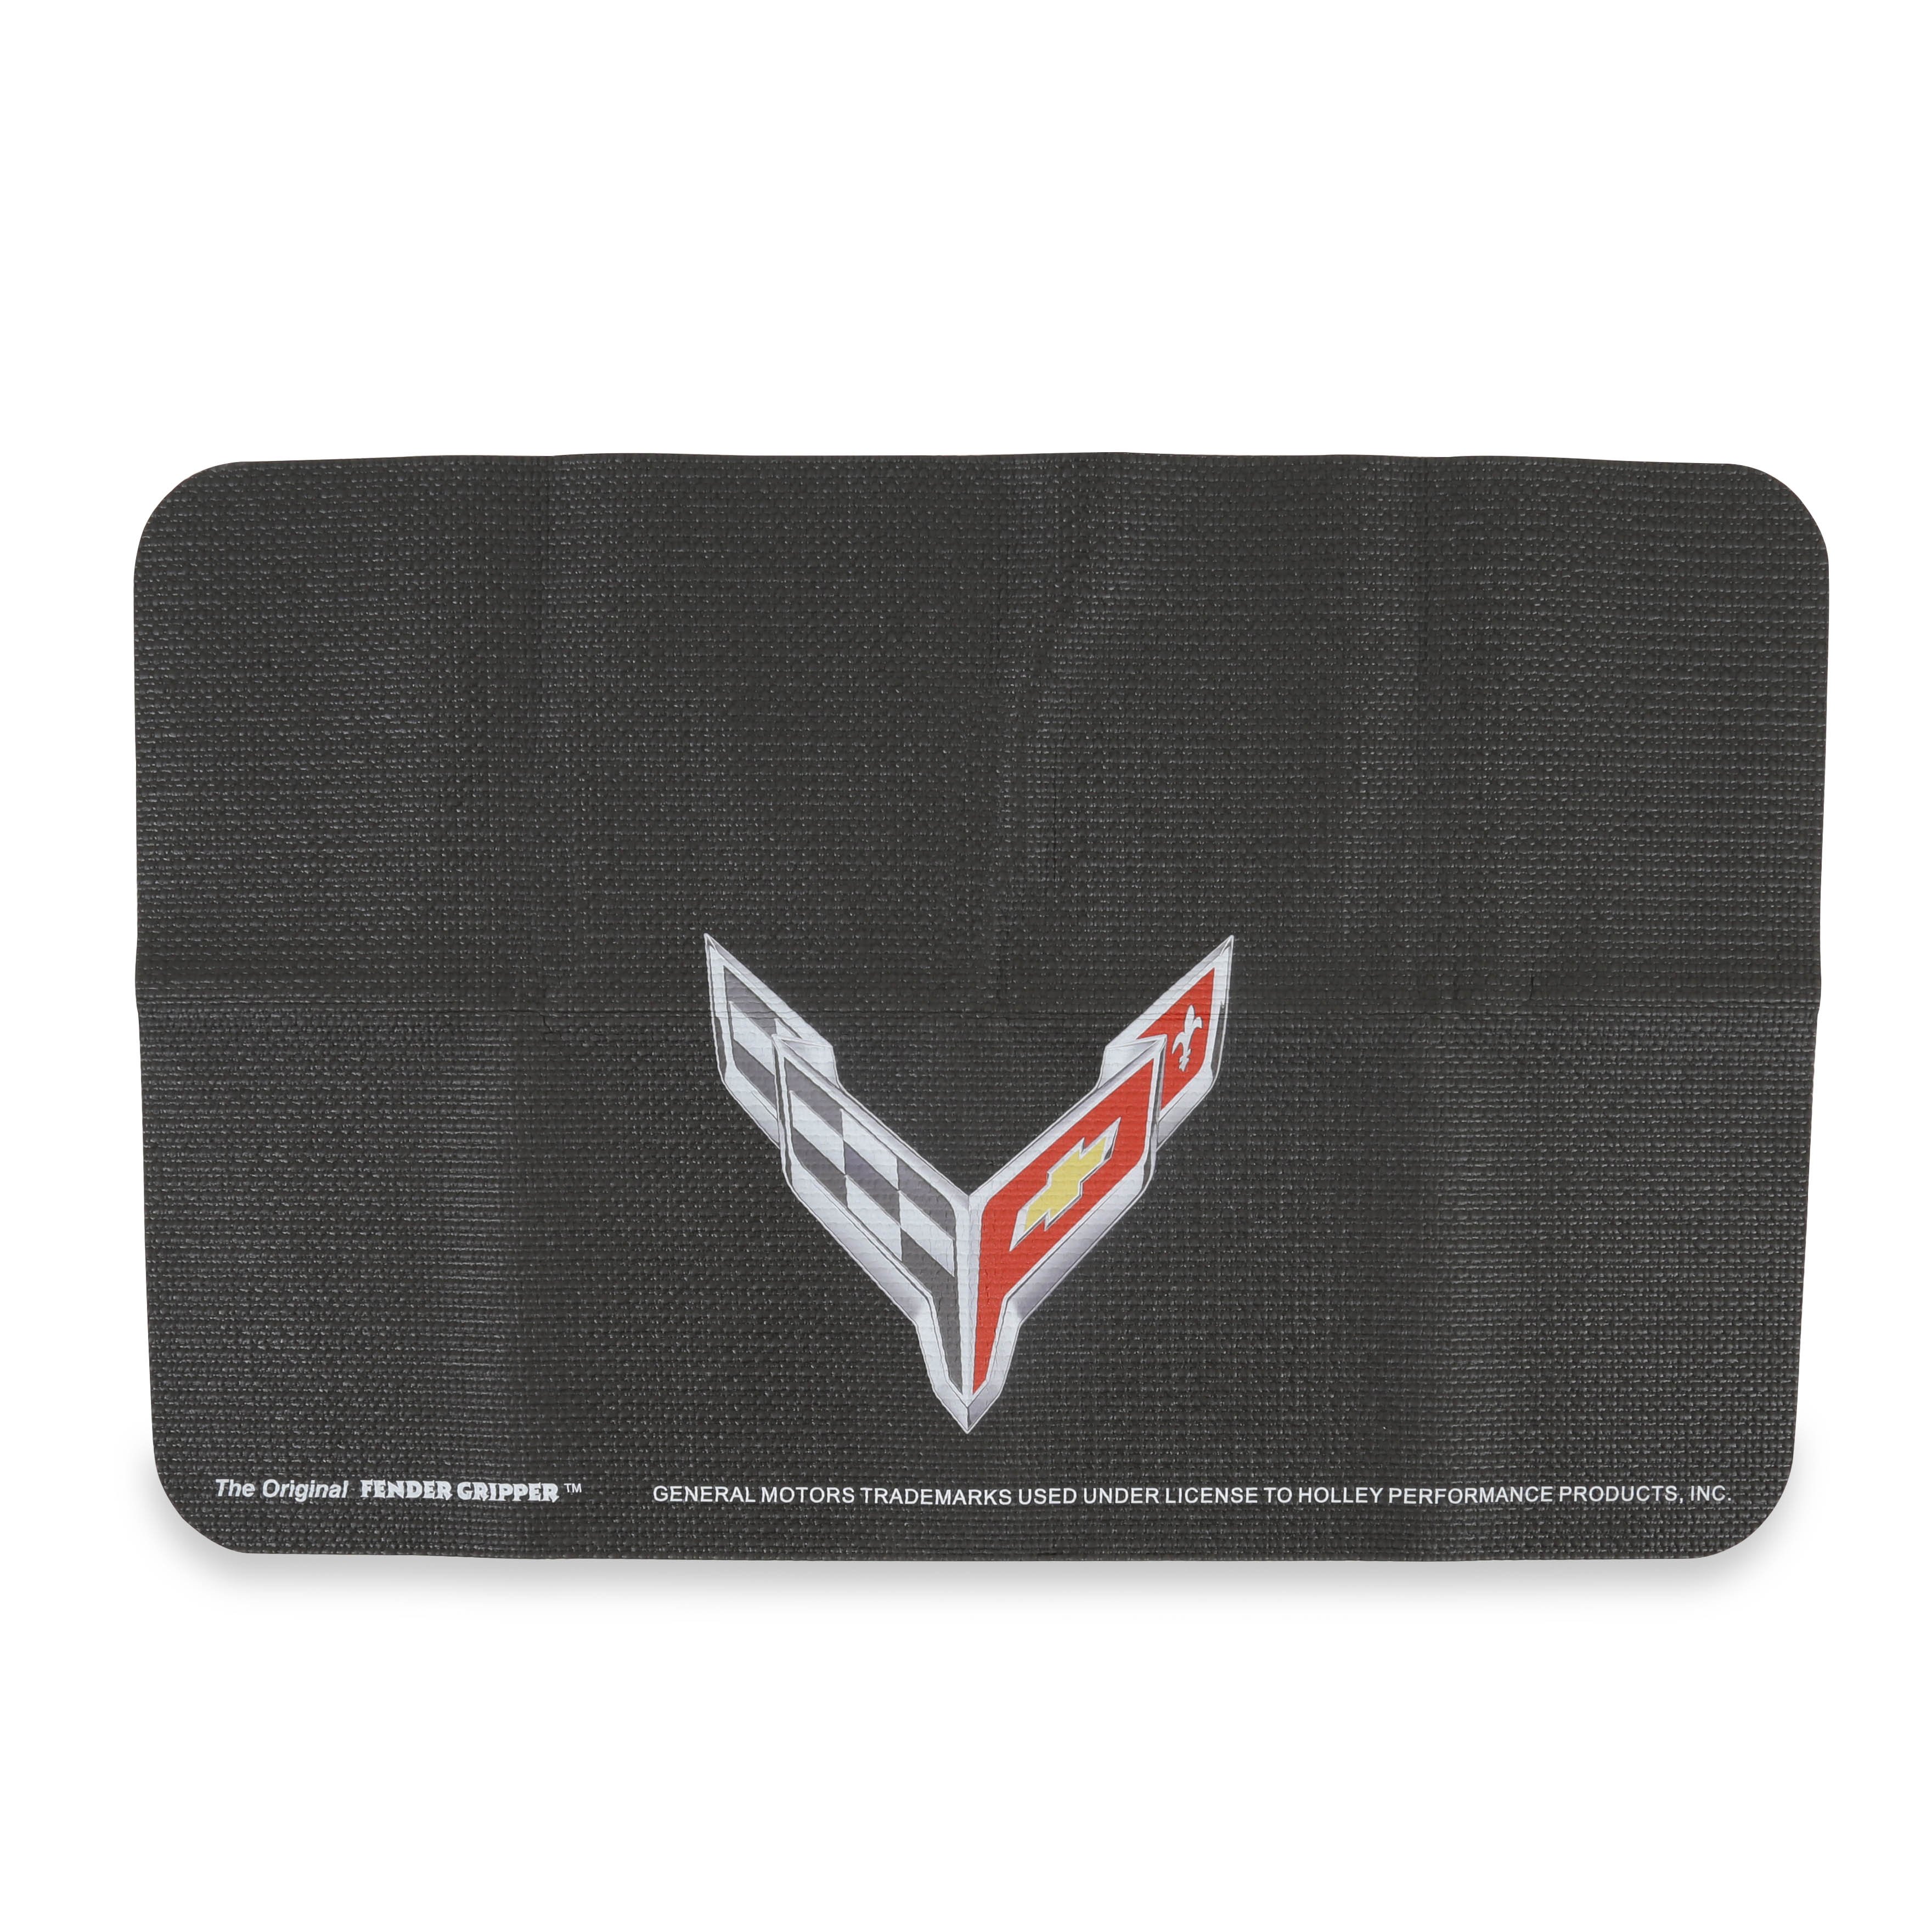 C8 Corvette Fender Grippers, with C8 Flag Logo, Protect the finsih on your car